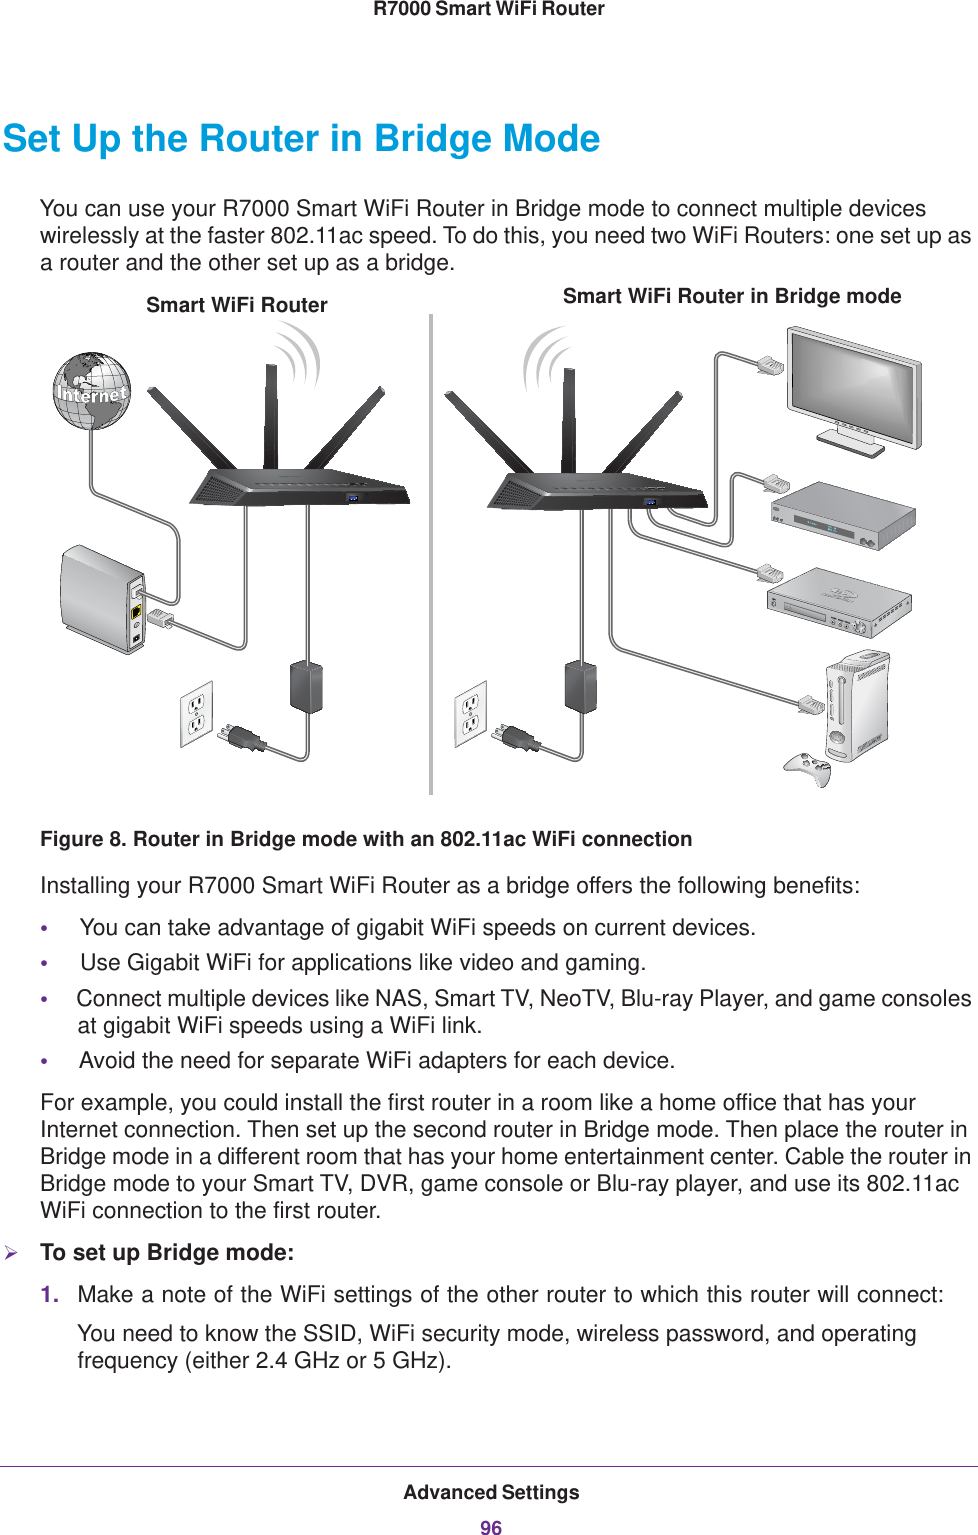 Advanced Settings96R7000 Smart WiFi Router Set Up the Router in Bridge Mode You can use your R7000 Smart WiFi Router in Bridge mode to connect multiple devices wirelessly at the faster 802.11ac speed. To do this, you need two WiFi Routers: one set up as a router and the other set up as a bridge. Smart WiFi Router in Bridge modeSmart WiFi RouterFigure 8. Router in Bridge mode with an 802.11ac WiFi connectionInstalling your R7000 Smart WiFi Router as a bridge offers the following benefits:•     You can take advantage of gigabit WiFi speeds on current devices.•     Use Gigabit WiFi for applications like video and gaming.•     Connect multiple devices like NAS, Smart TV, NeoTV, Blu-ray Player, and game consoles at gigabit WiFi speeds using a WiFi link.•     Avoid the need for separate WiFi adapters for each device.For example, you could install the first router in a room like a home office that has your Internet connection. Then set up the second router in Bridge mode. Then place the router in Bridge mode in a different room that has your home entertainment center. Cable the router in Bridge mode to your Smart TV, DVR, game console or Blu-ray player, and use its 802.11ac WiFi connection to the first router. To set up Bridge mode:1. Make a note of the WiFi settings of the other router to which this router will connect:You need to know the SSID, WiFi security mode, wireless password, and operating frequency (either 2.4 GHz or 5 GHz).